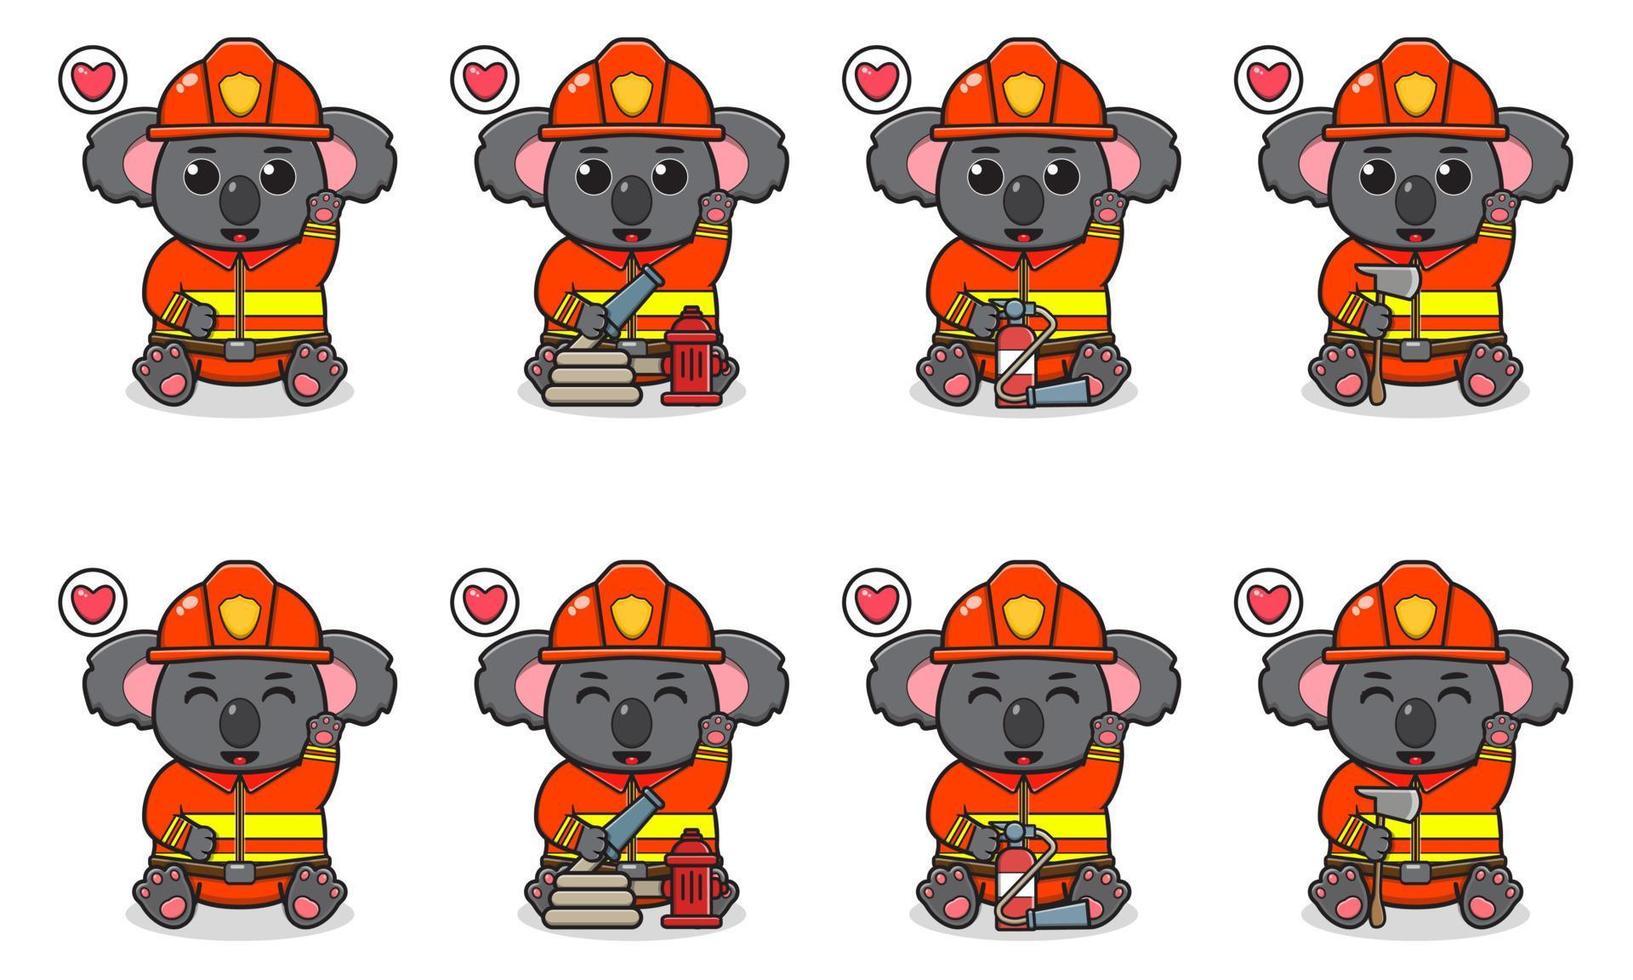 Vector Illustration of Cute sitting Koala cartoon with Firefighter costume and hand up pose.